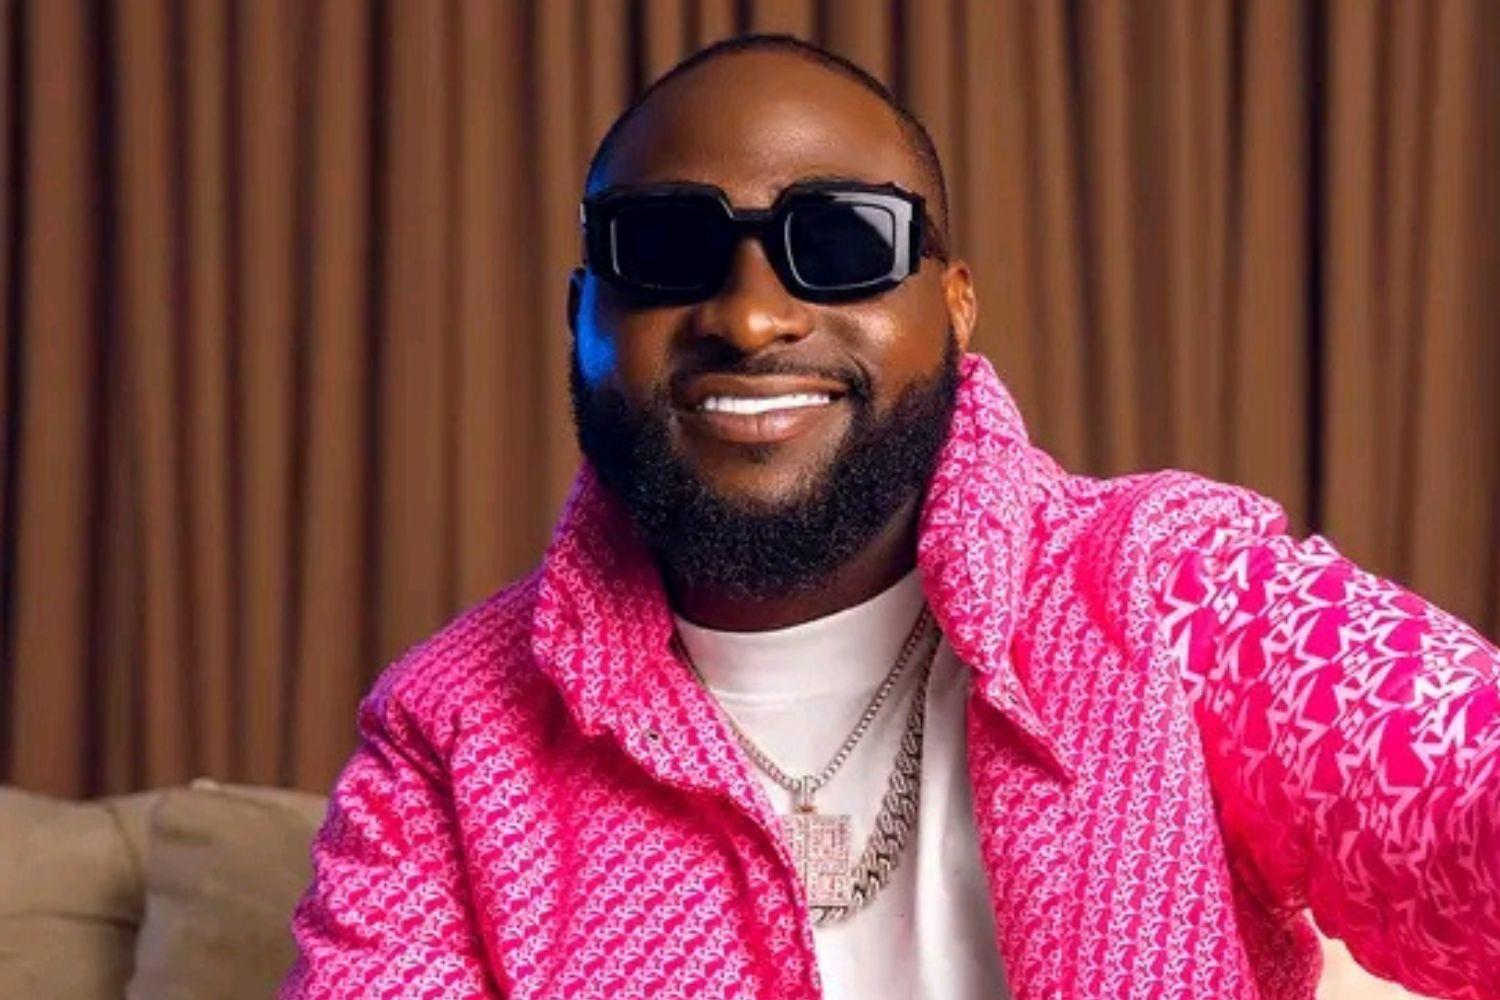 April Fools: Tender apology within 48 hours or face legal action, Davido tells Kenya’s K24 TV